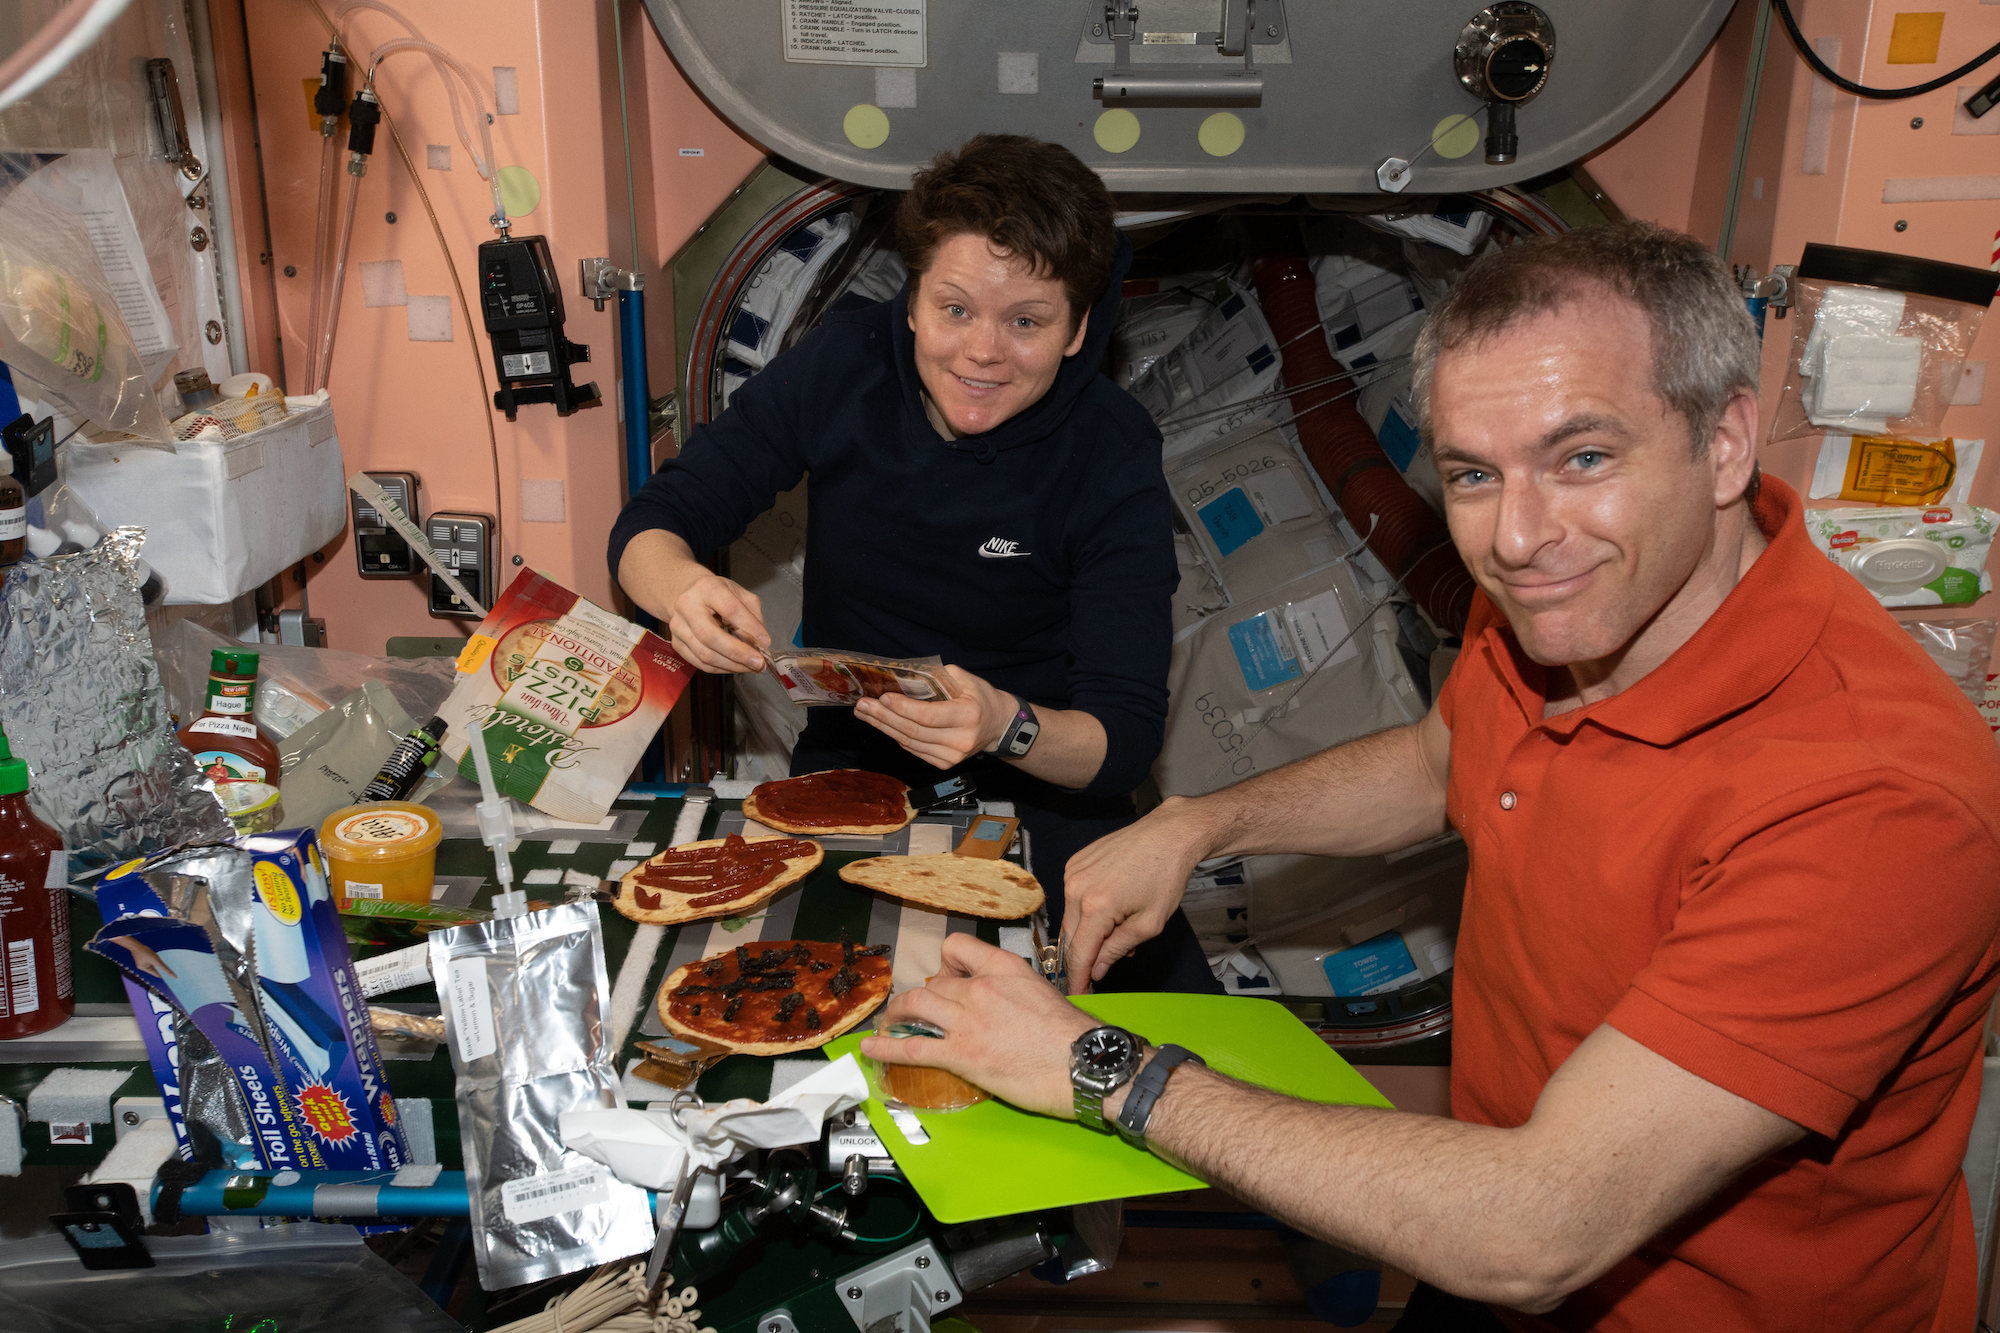 Sorry, you can’t eat these popular foods on the International Space Station